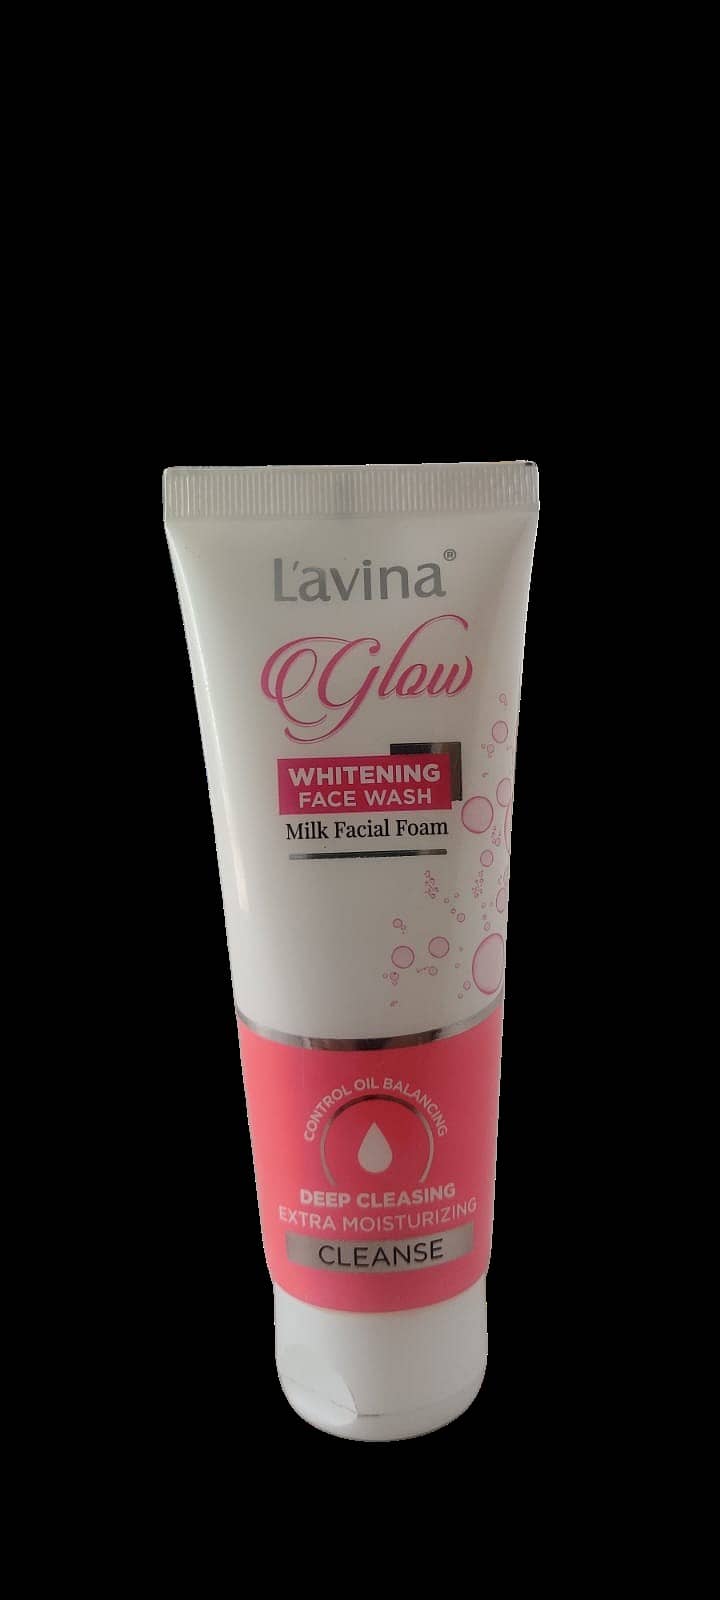 Lavina Glow Whitening Face Wash Milk Facial Form, Deep Cleasing Extra 1